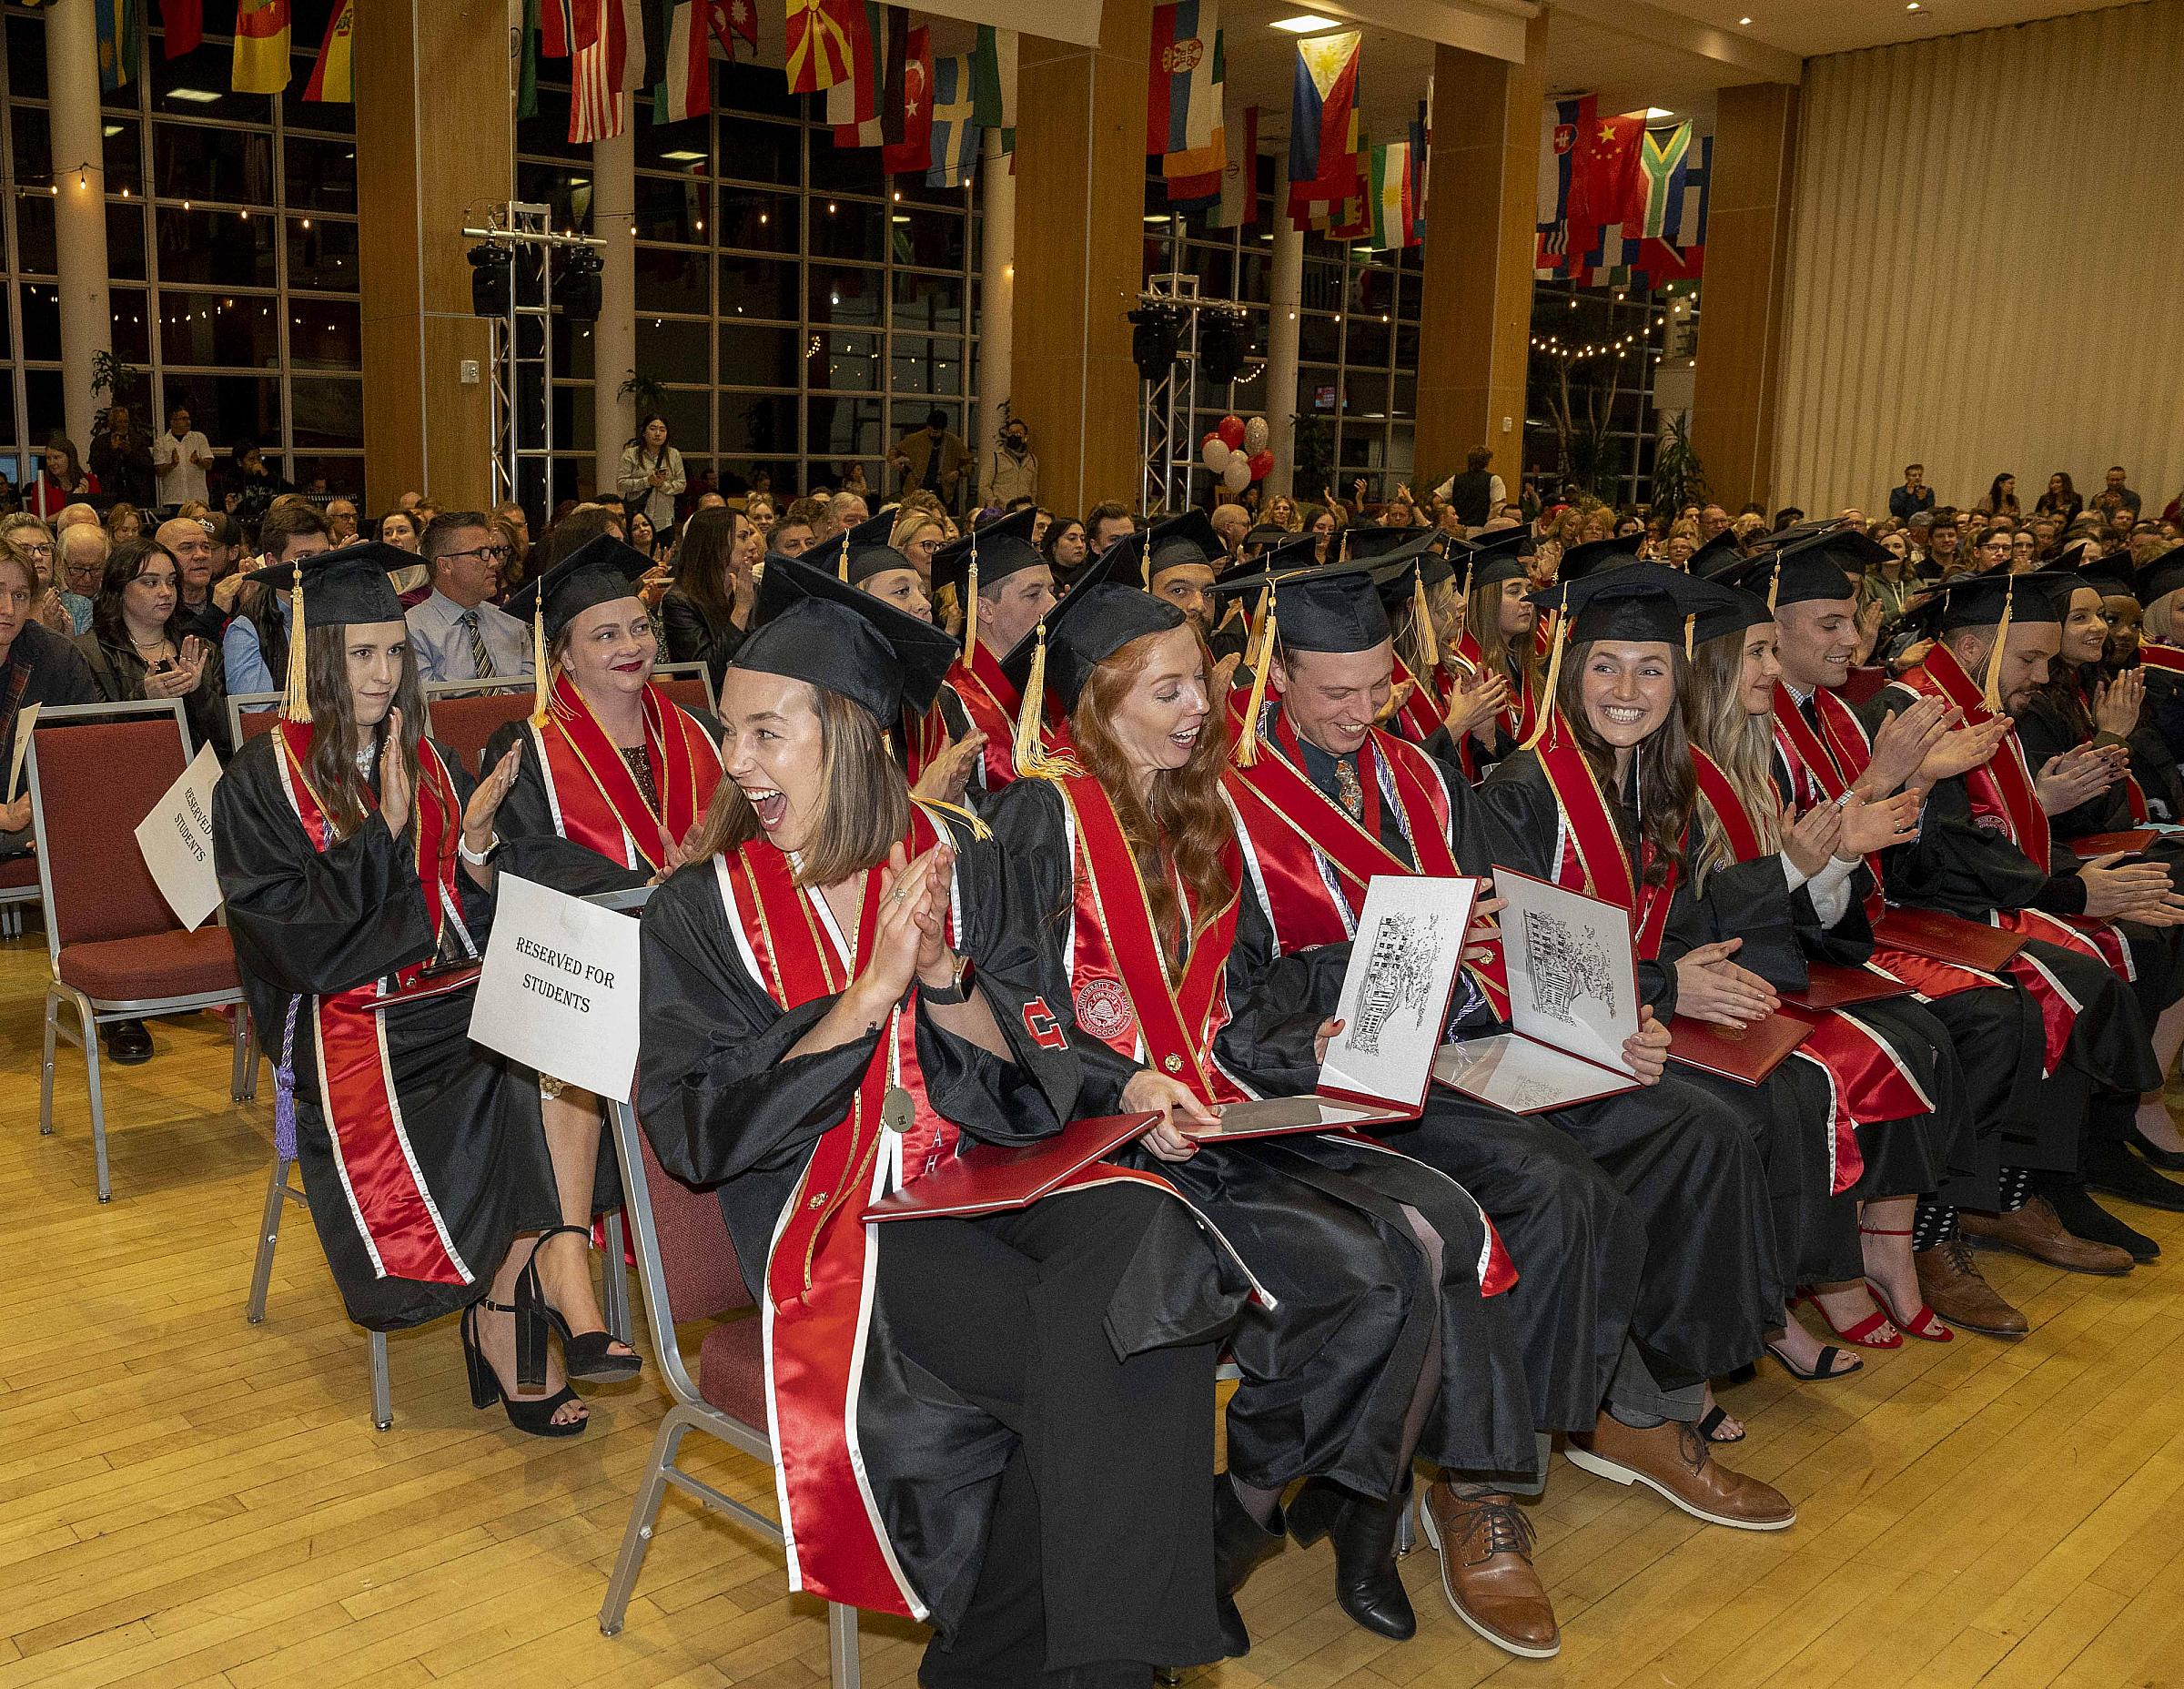 Graduates sitting in a row wearing black and red regalia